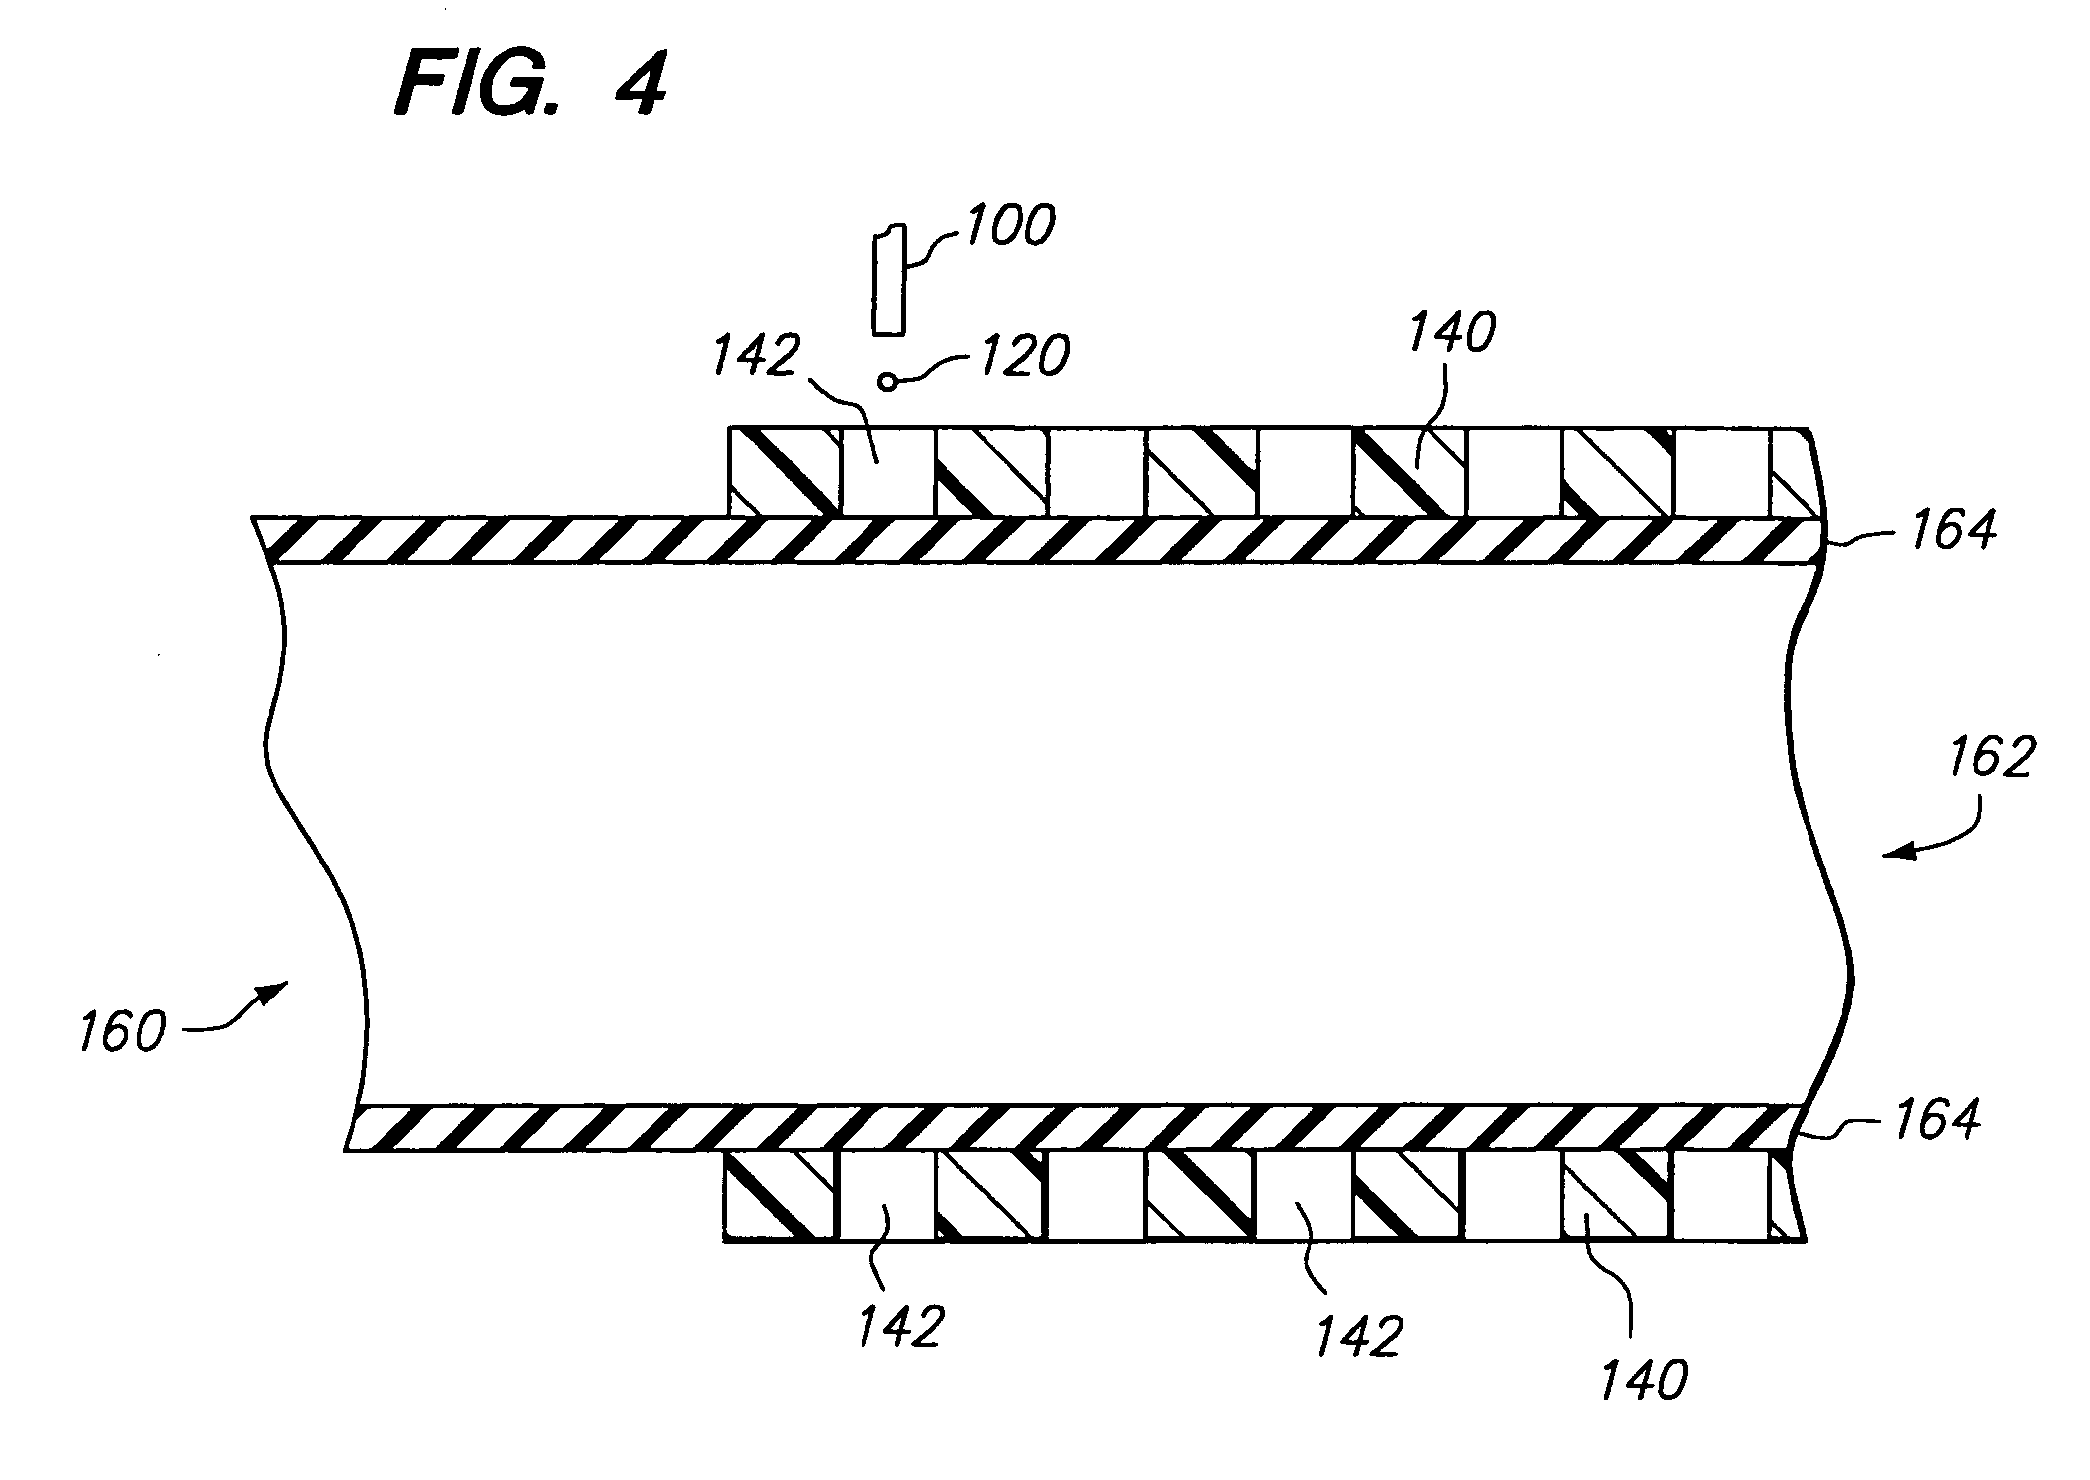 Method and apparatus for loading a beneficial agent into an expandable medical device